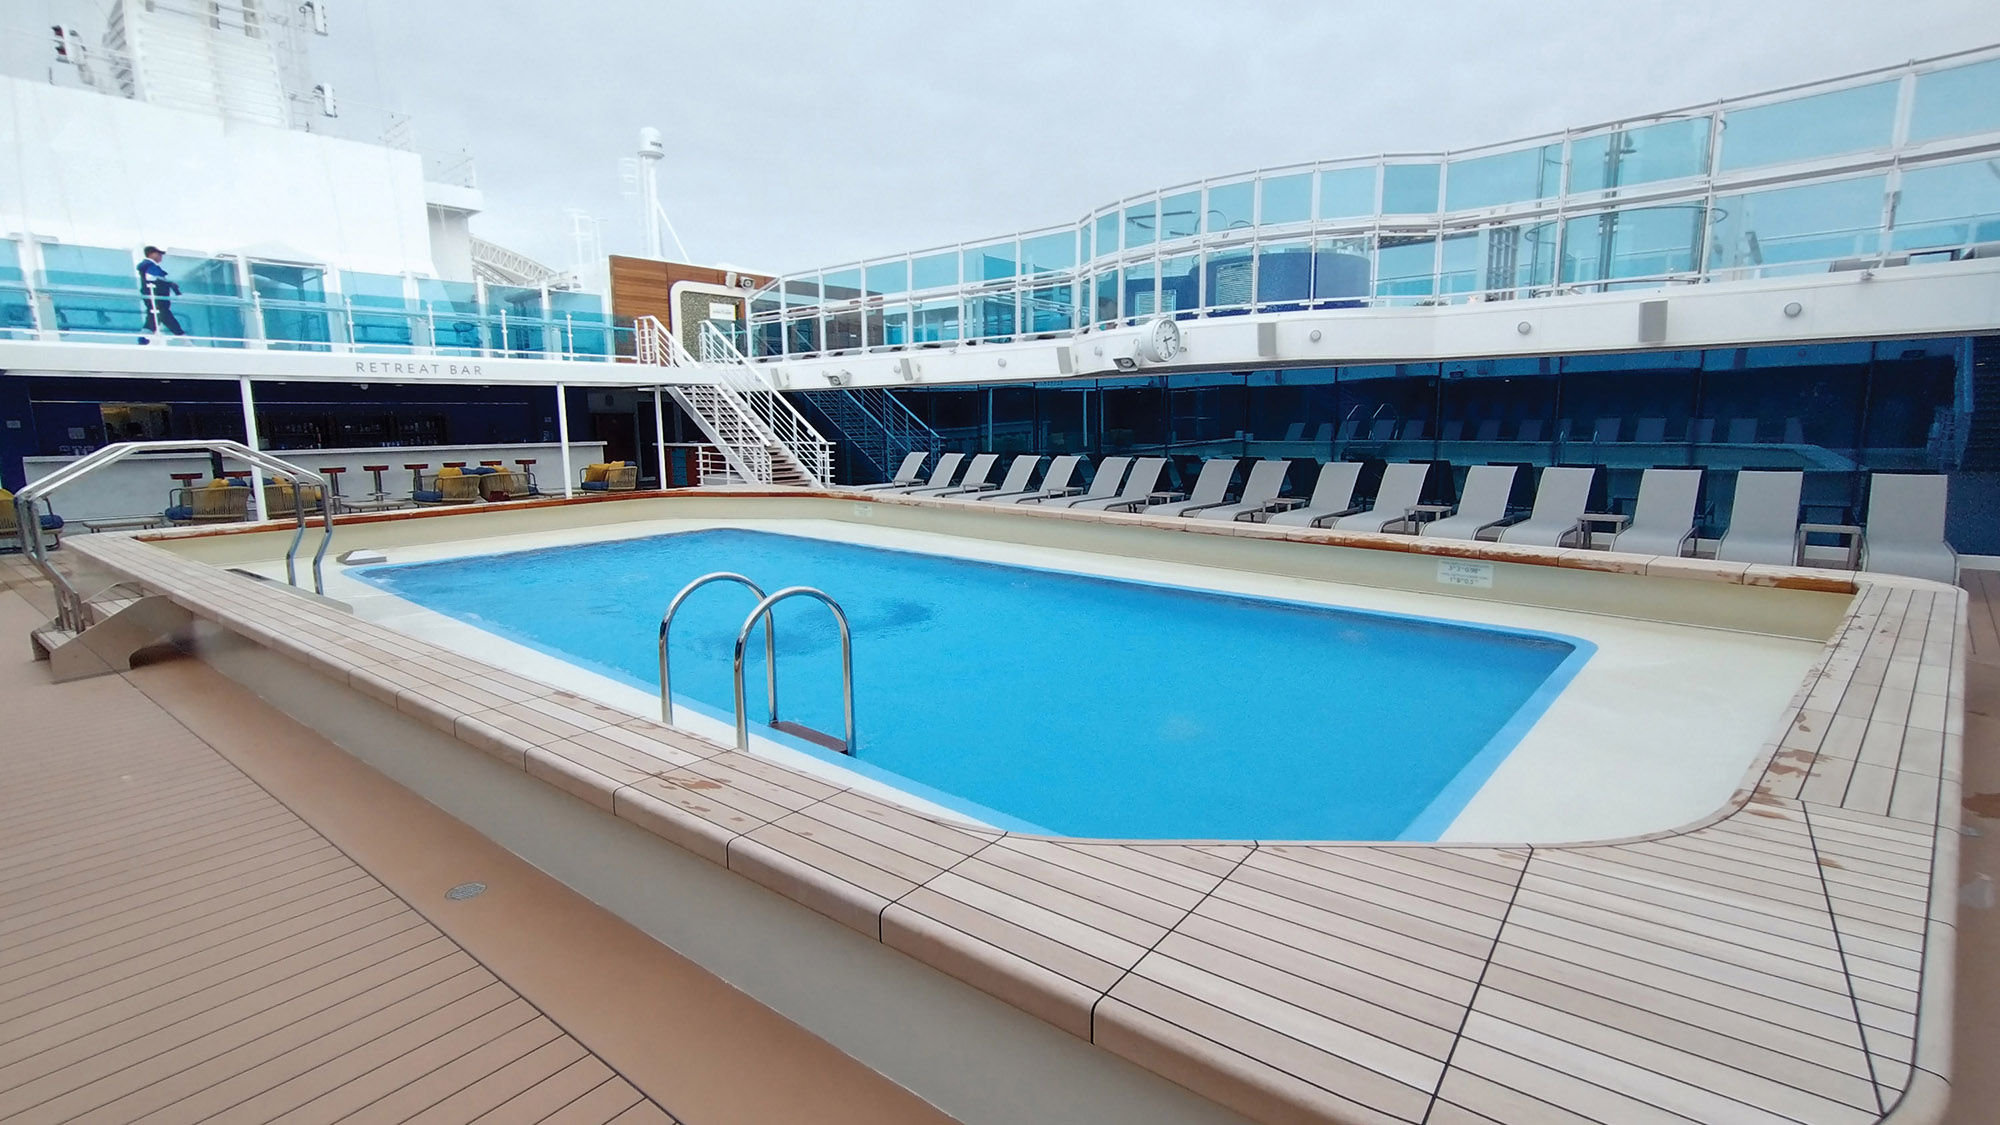 The Discovery Princess' pool deck.